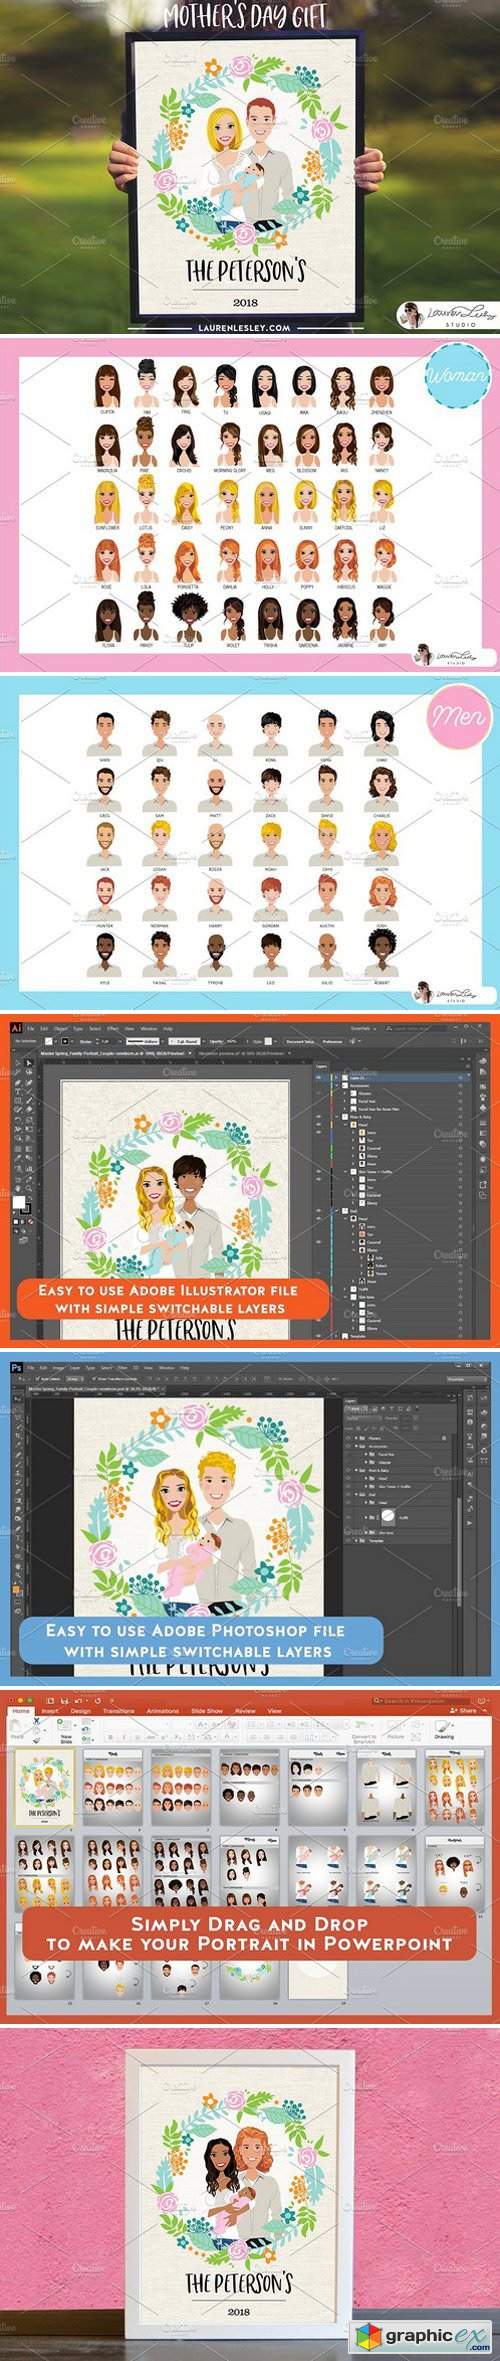 Mother's Day Family Portrait Builder